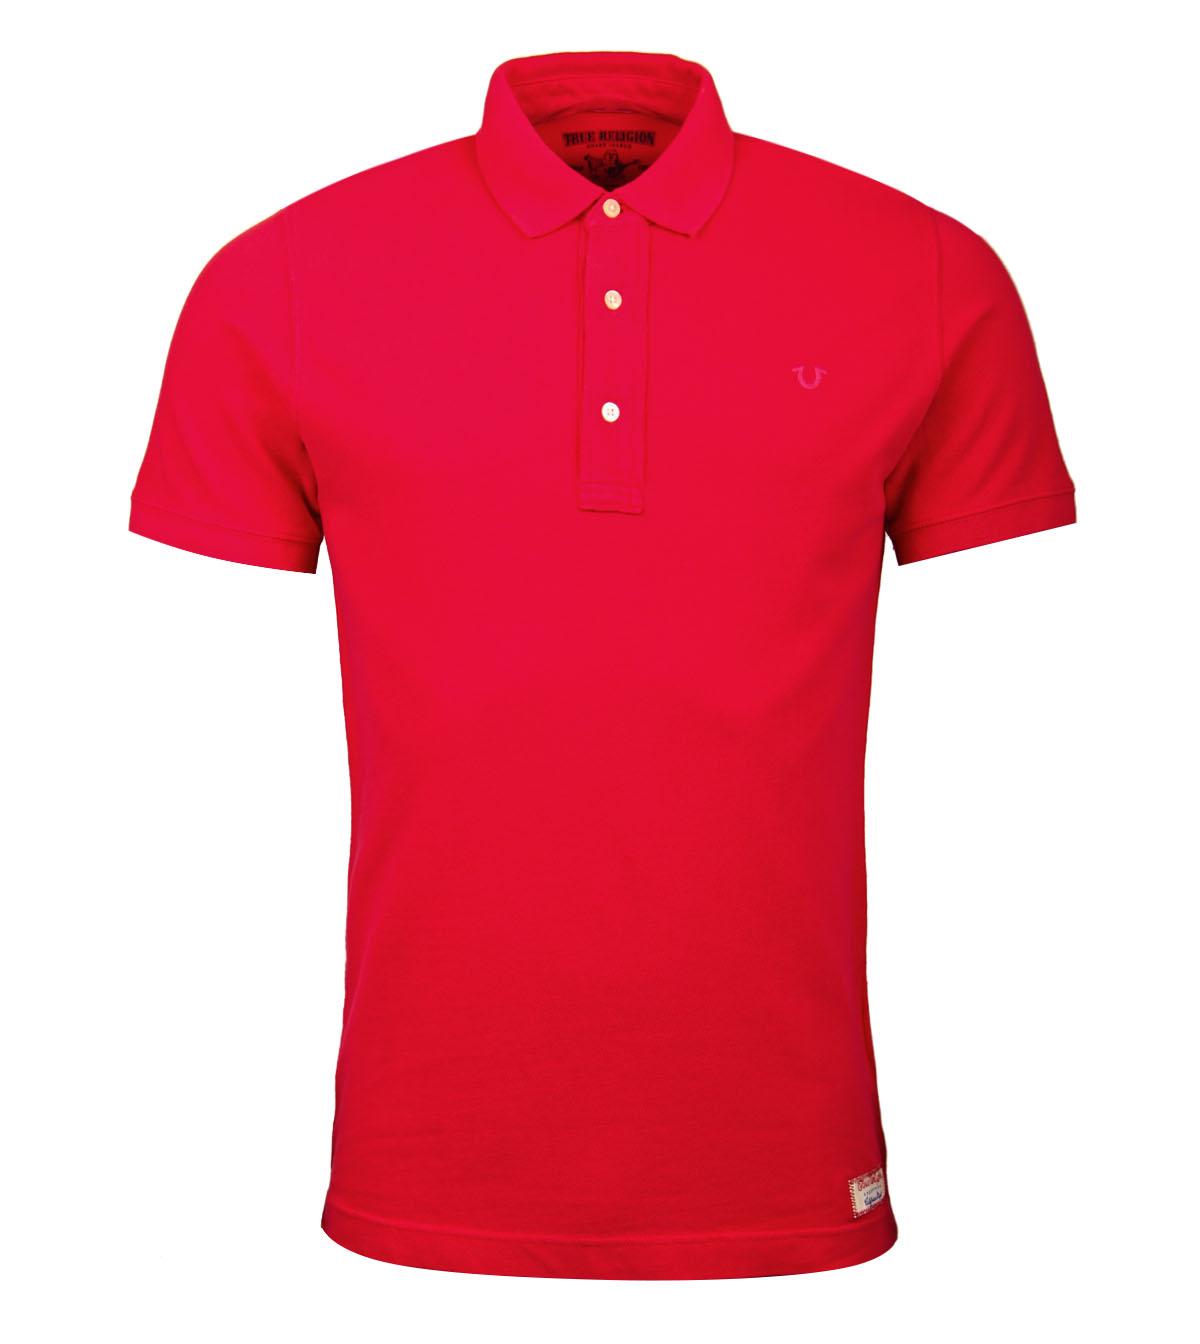 Foto True Religion Pink Washed Cotton Polo Shirt-S foto 917863